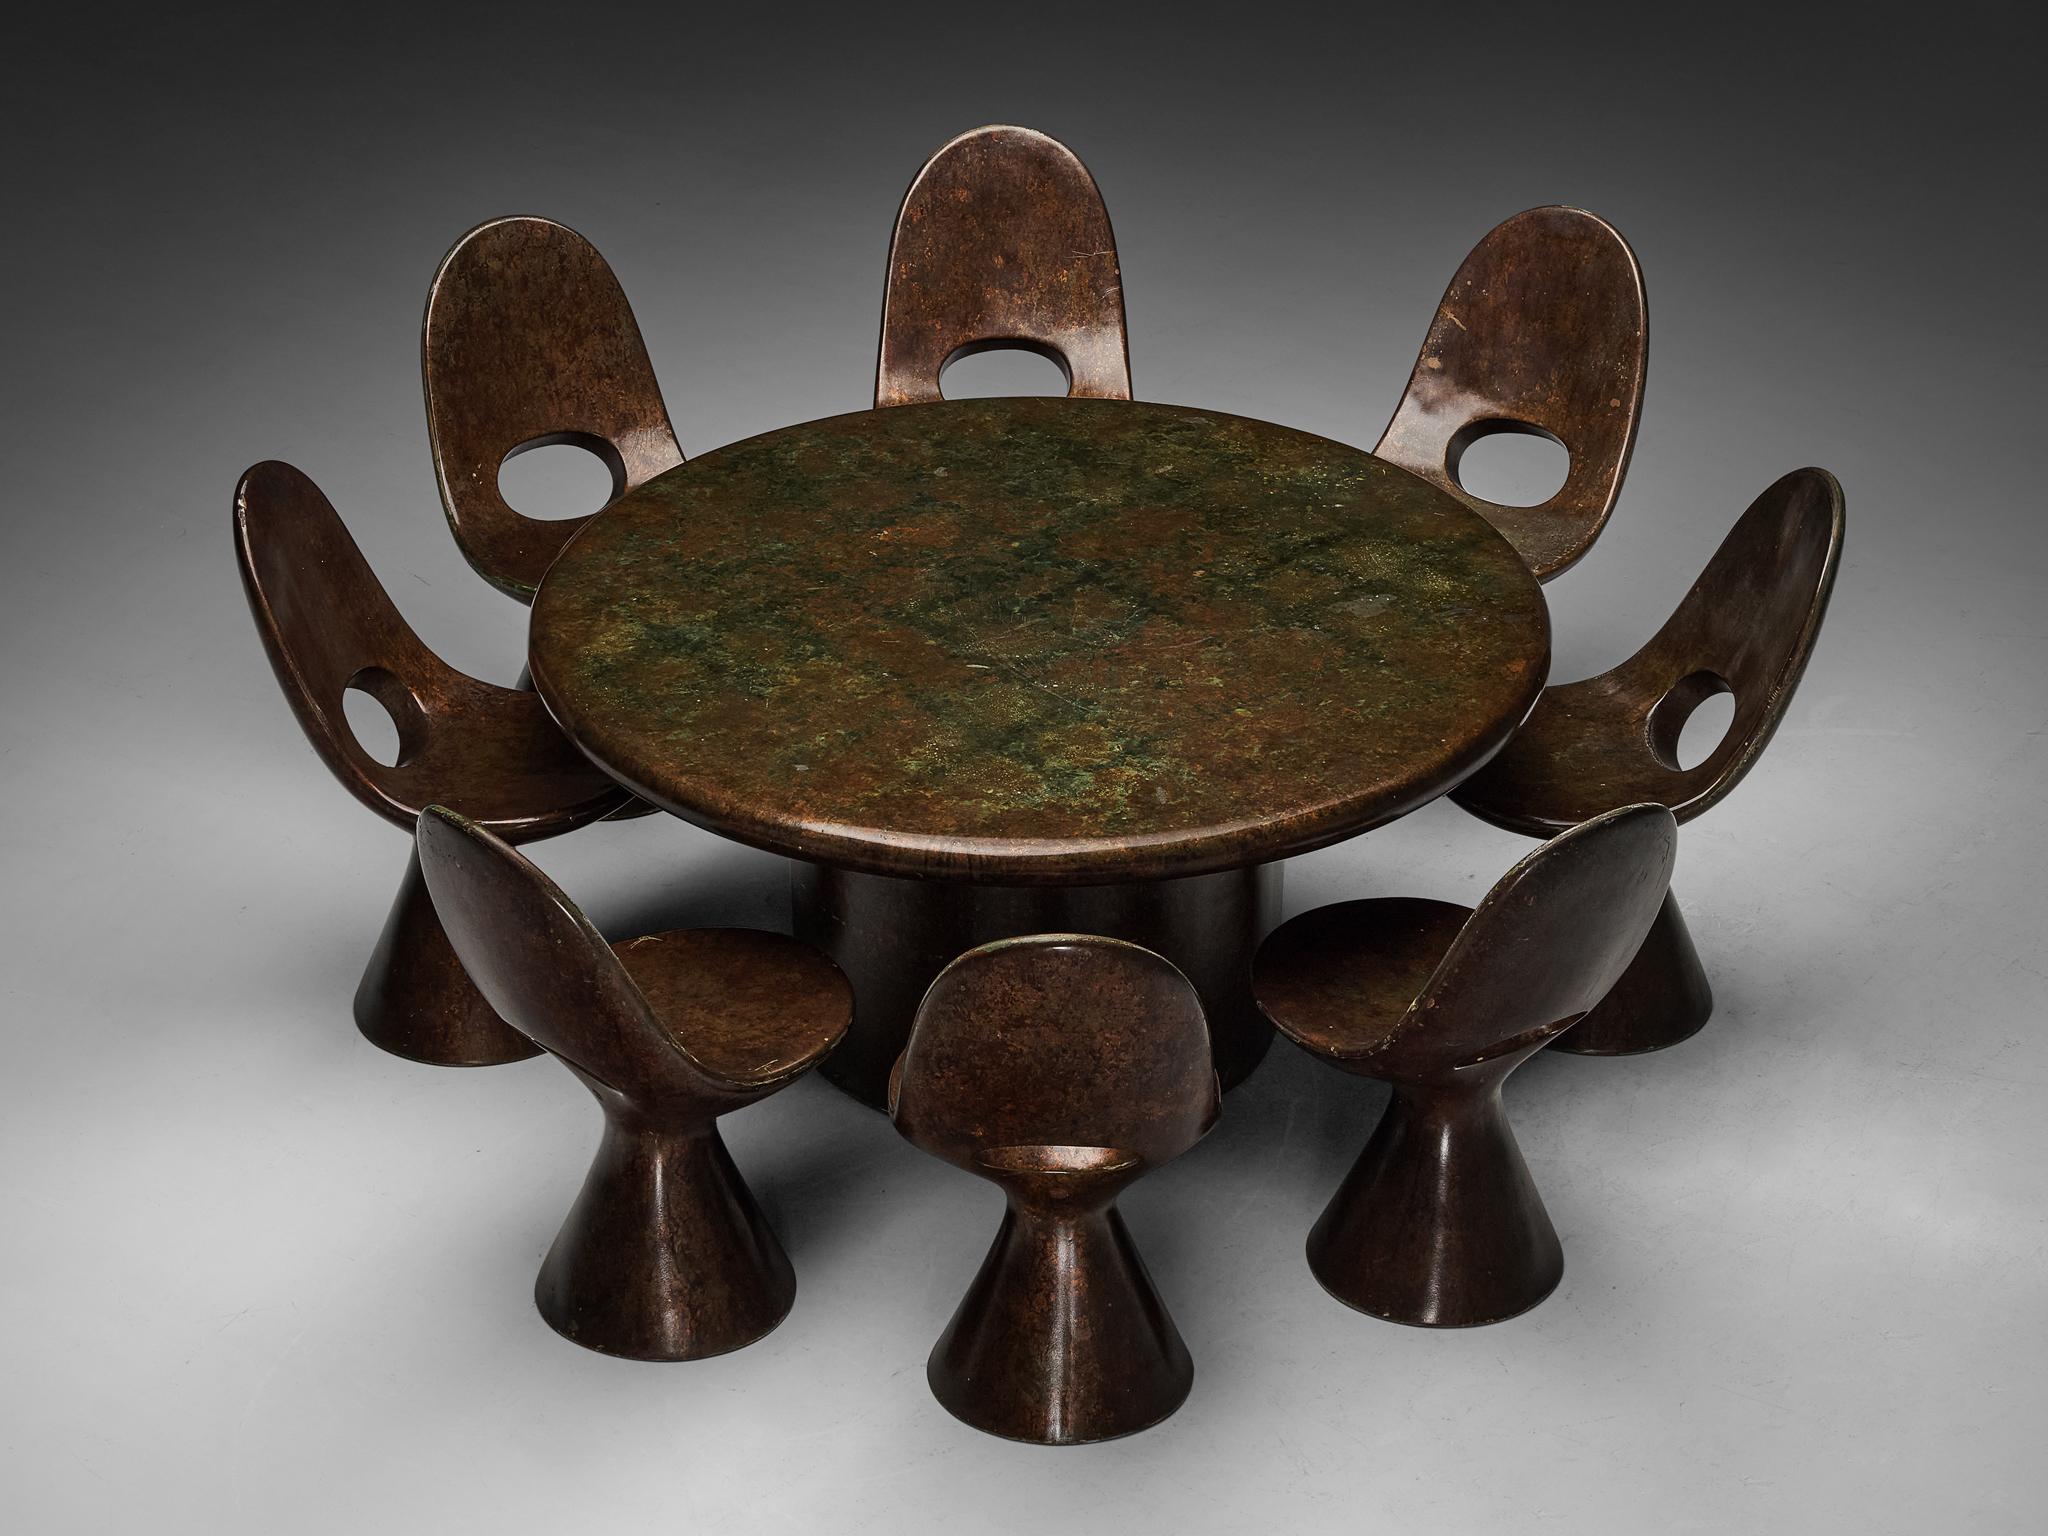 Dining room or garden set including a table and eight chairs, fiberglass, Italy, 1980s

Encountering such a distinctive ensemble, comprising a table and dining chairs marked by a sculptural essence with a radiant expression, is a rare occurrence.